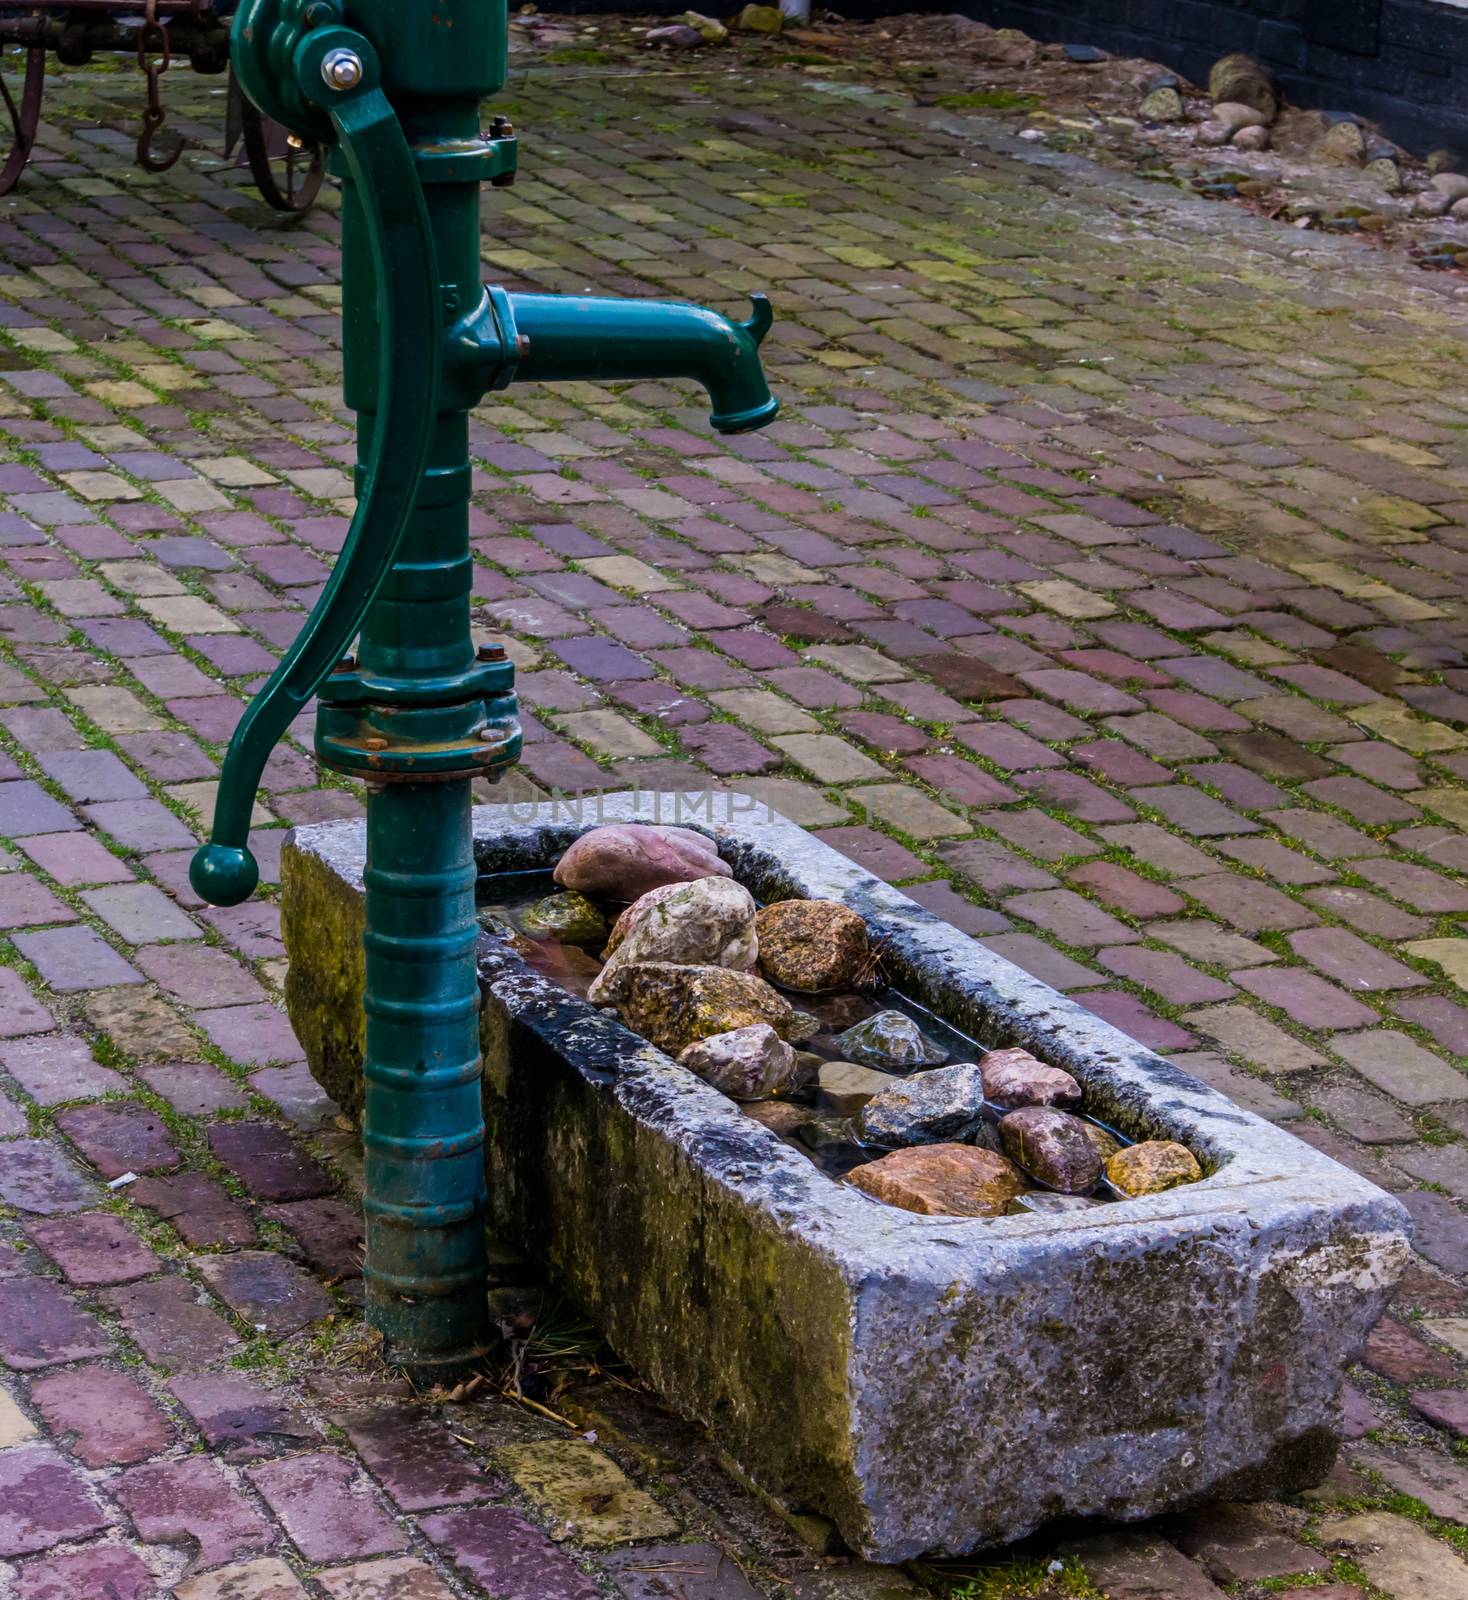 old vintage water pump, classical water systems, garden decorations by charlottebleijenberg